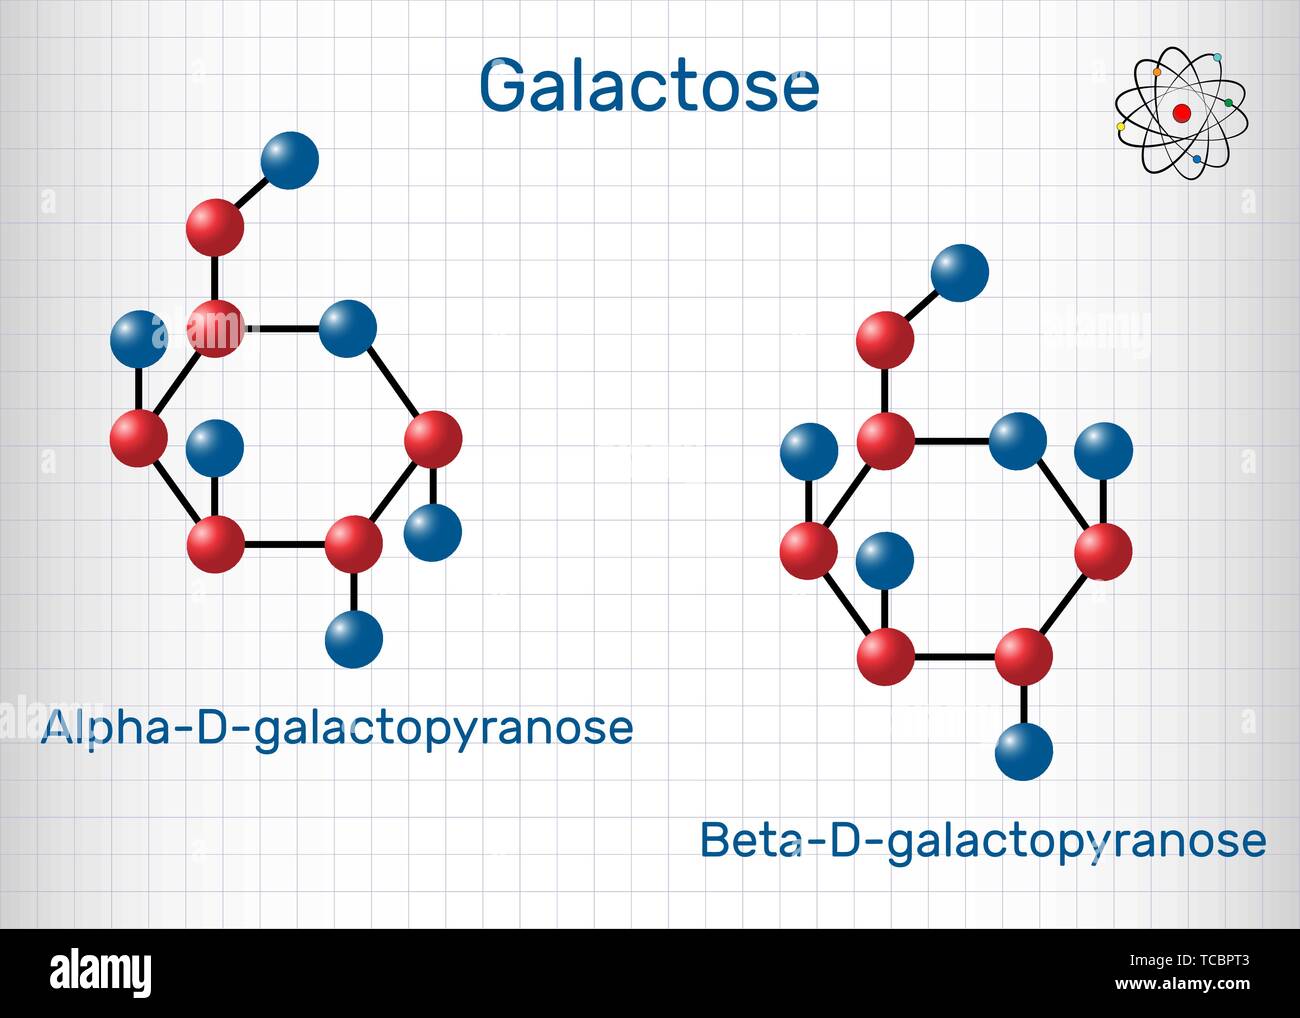 What is essentially the difference between α-form of glucose and β-form of  glucose? Explain. - ht13vpnuu